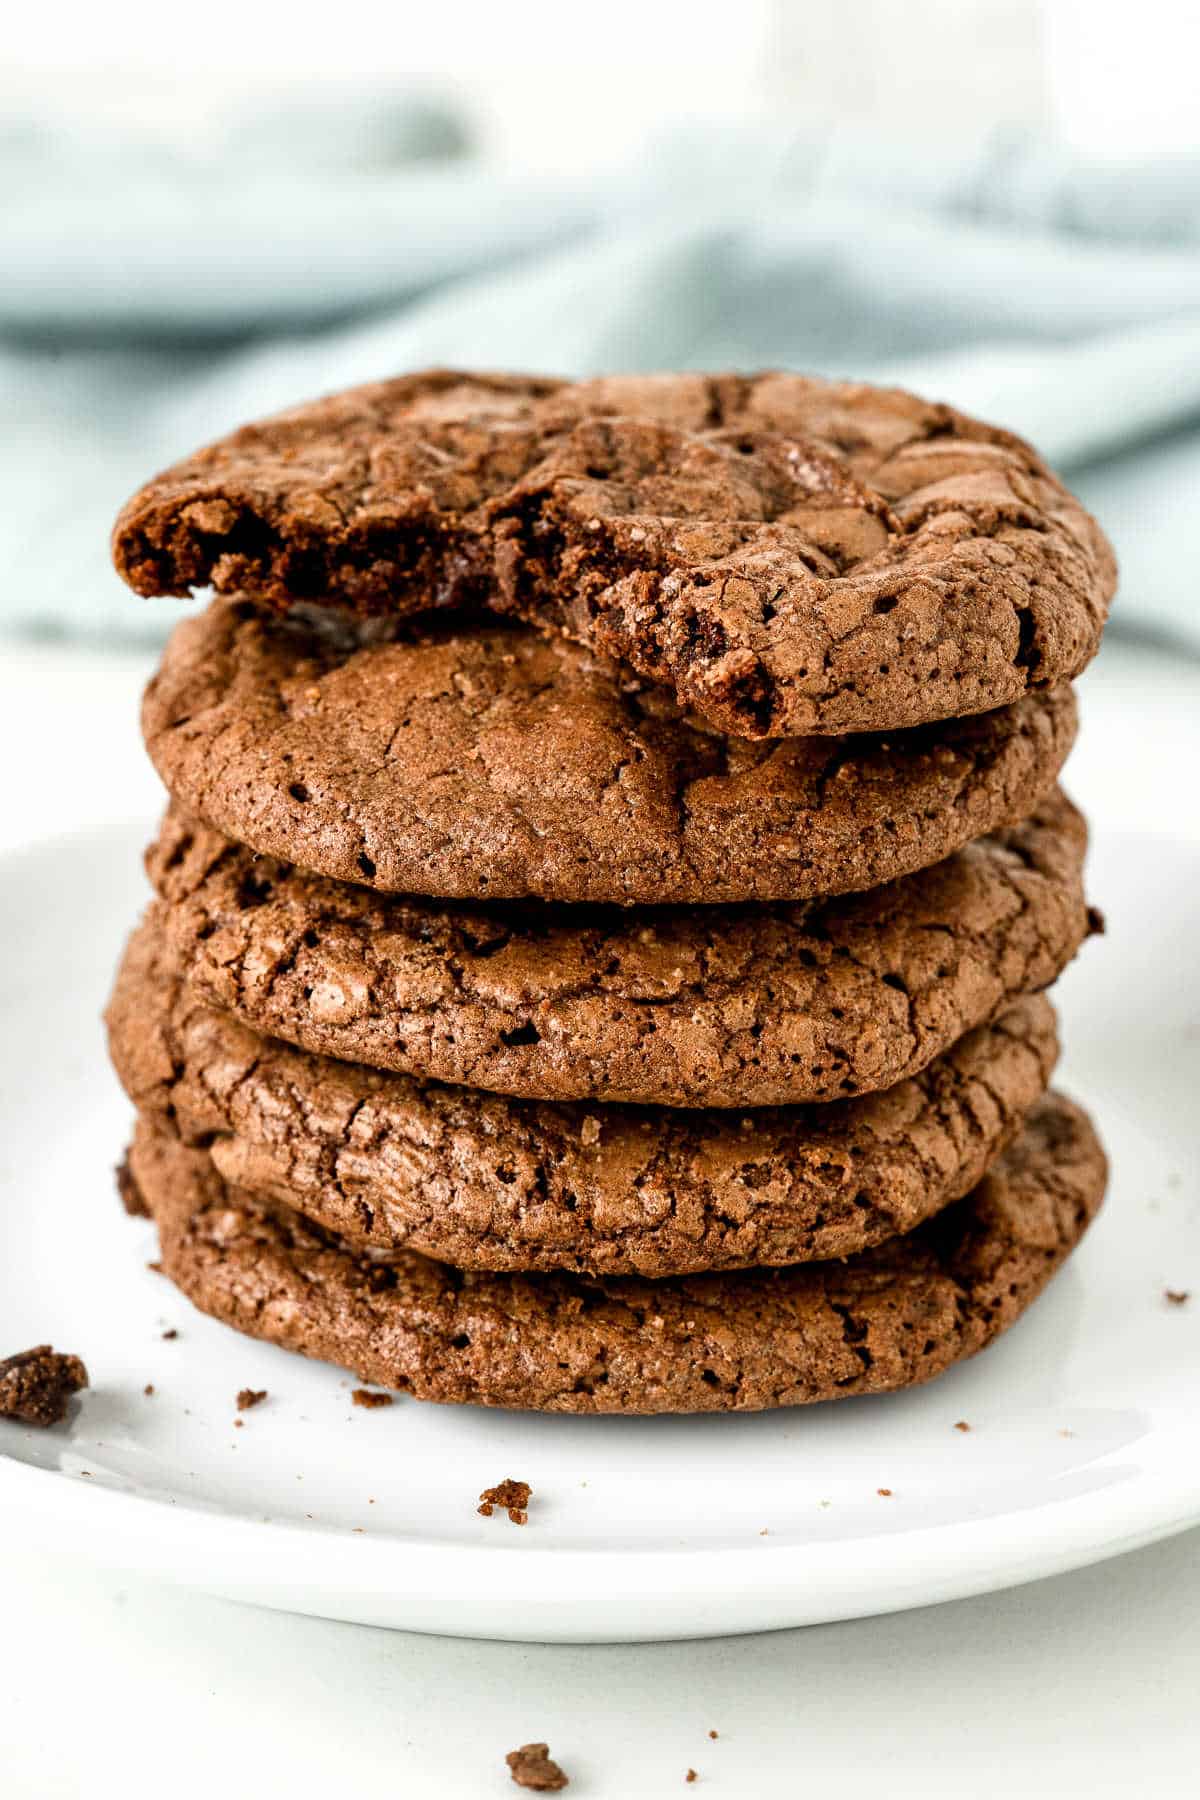 Stack of brownie cookies, the top one is bitten on a white plate. Blue cloth in the background.